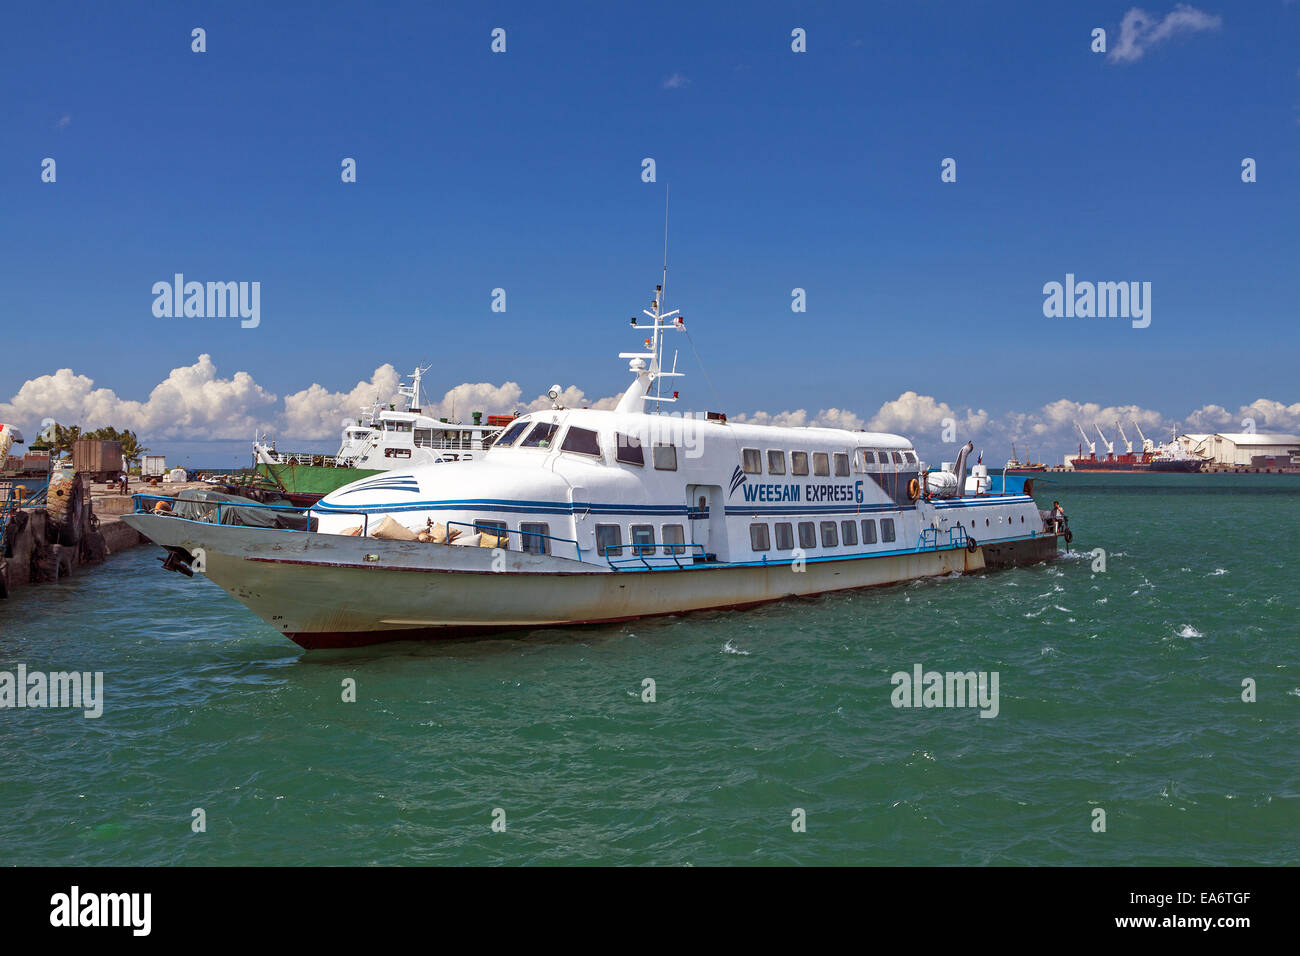 One of the inter island fast ferry boats arrives at port in Bacolod City, Negros Occidental Island, Philippines. Stock Photo